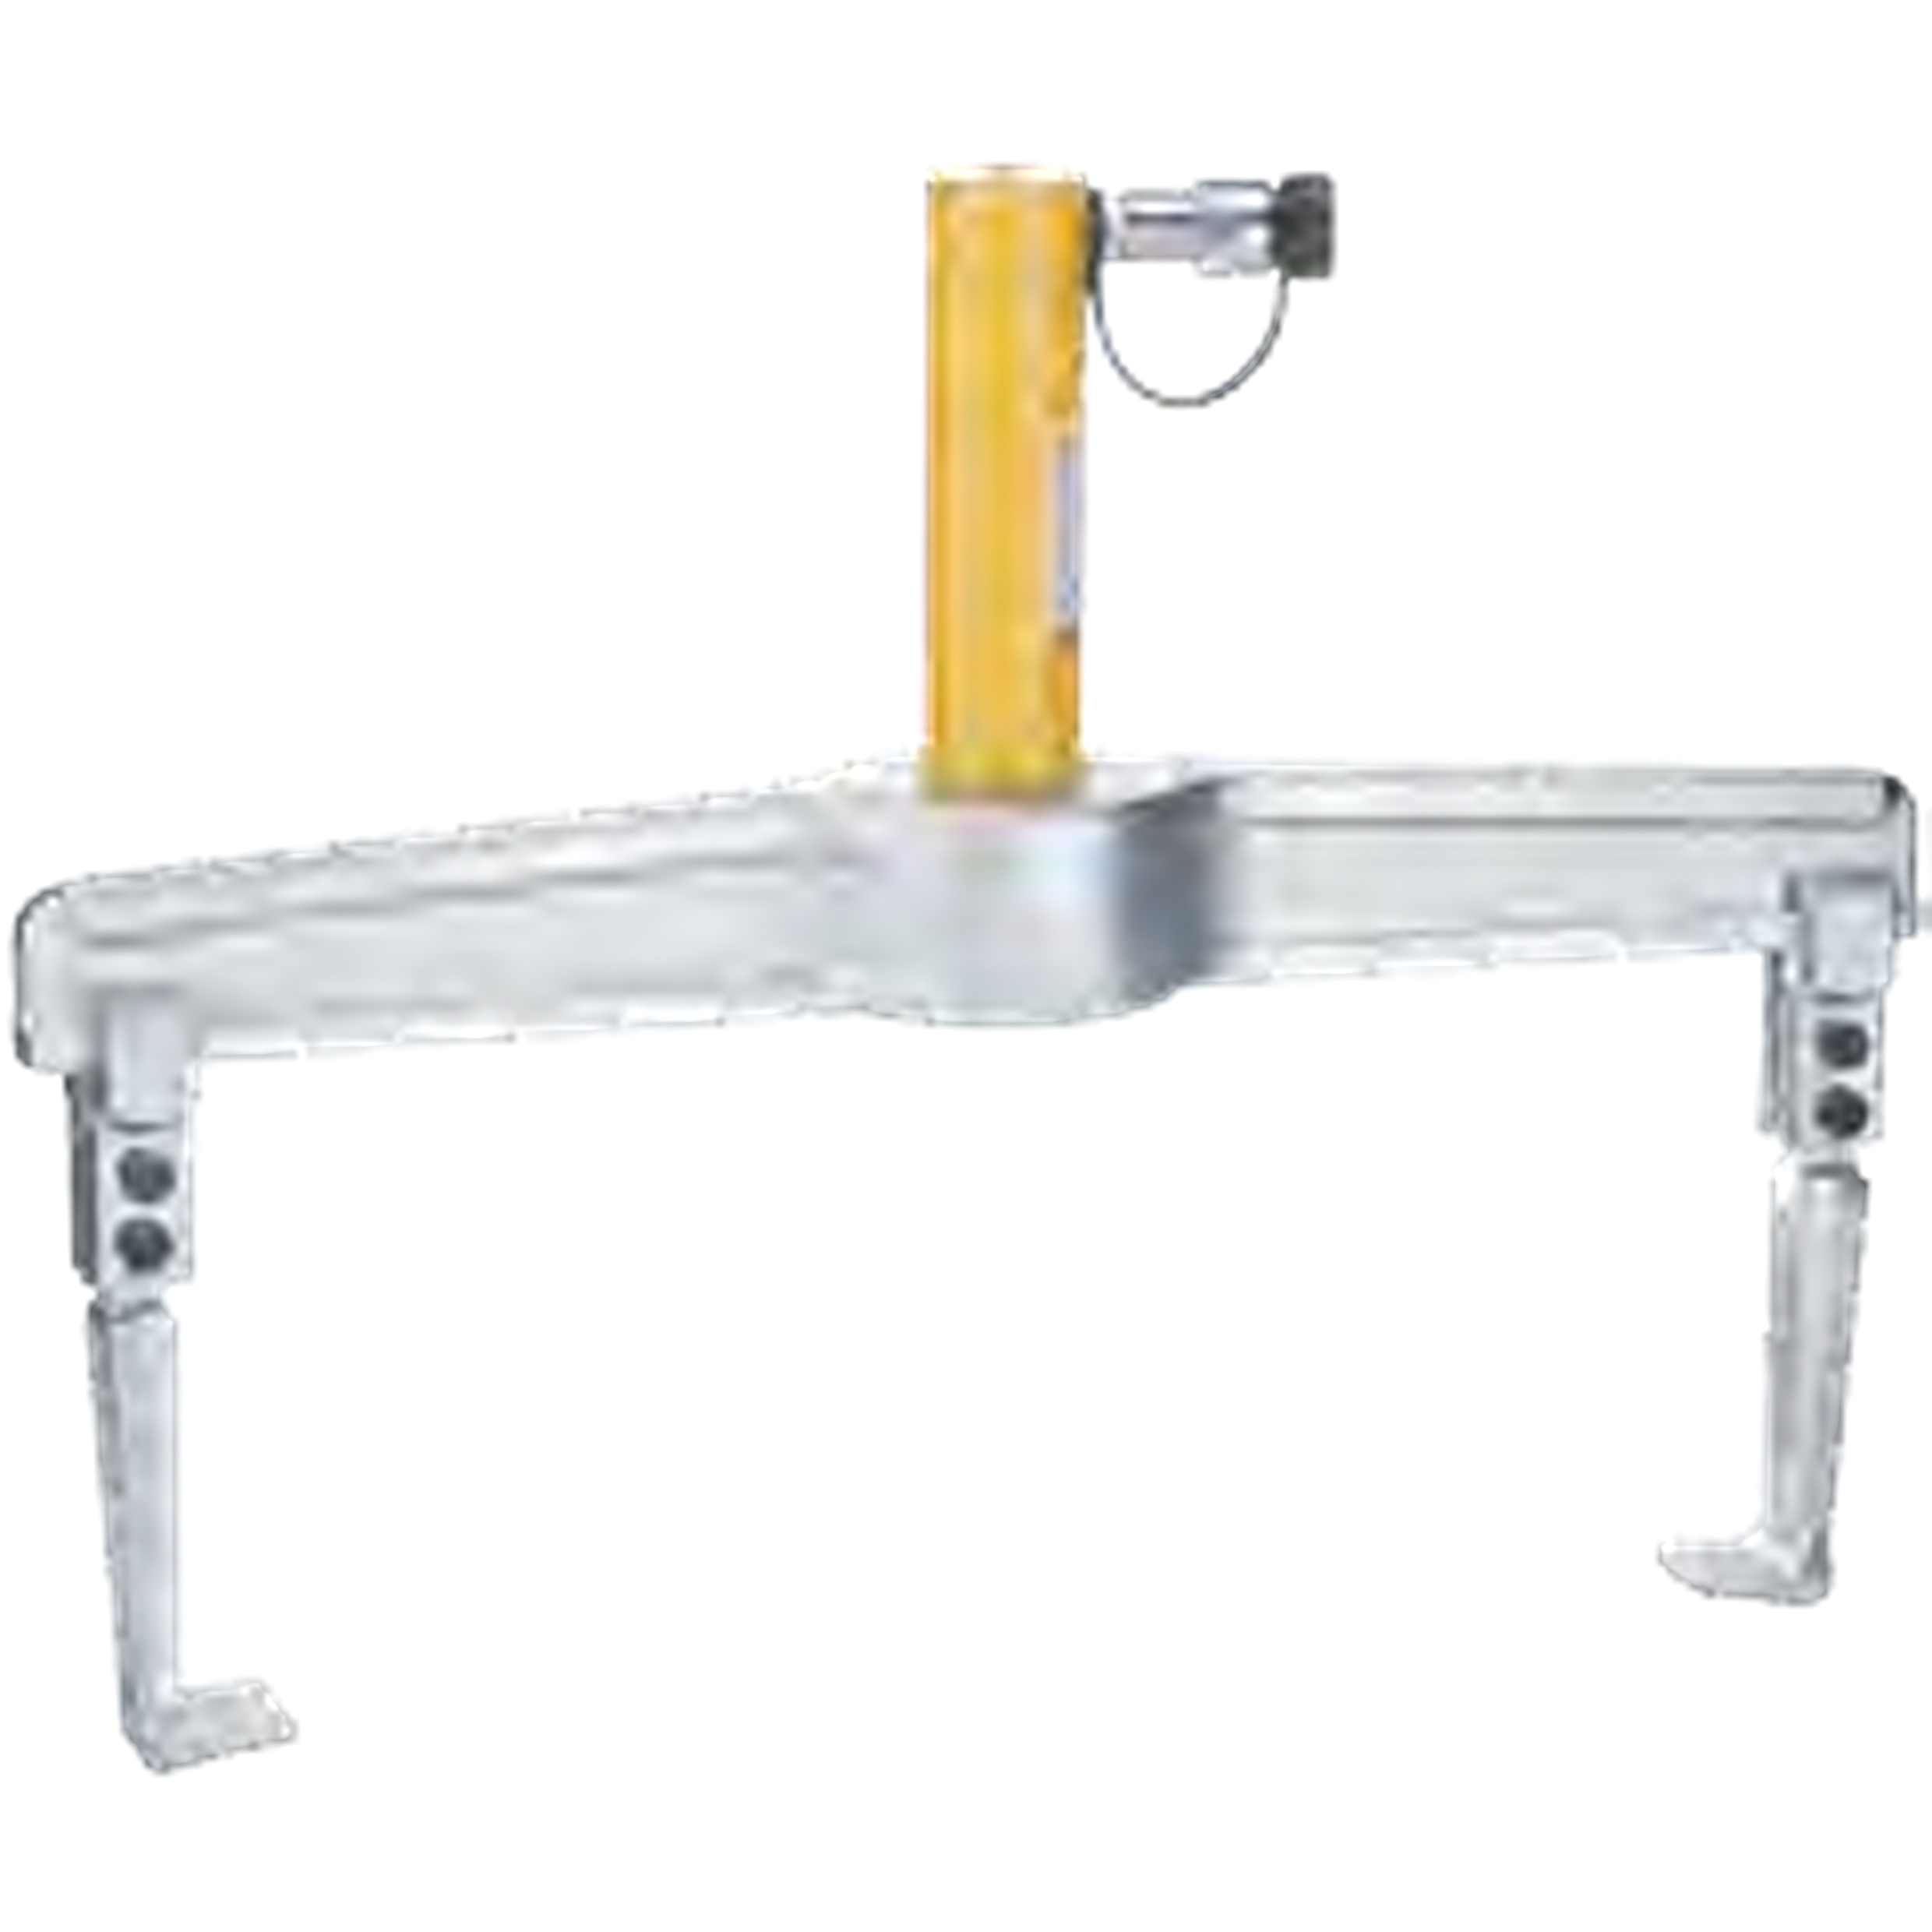 NEXUS HY100 2-Arm Hydraulic Puller Operating Puller Max 700 Bar - Premium 2-Arm Hydraulic Puller from NEXUS - Shop now at Yew Aik.